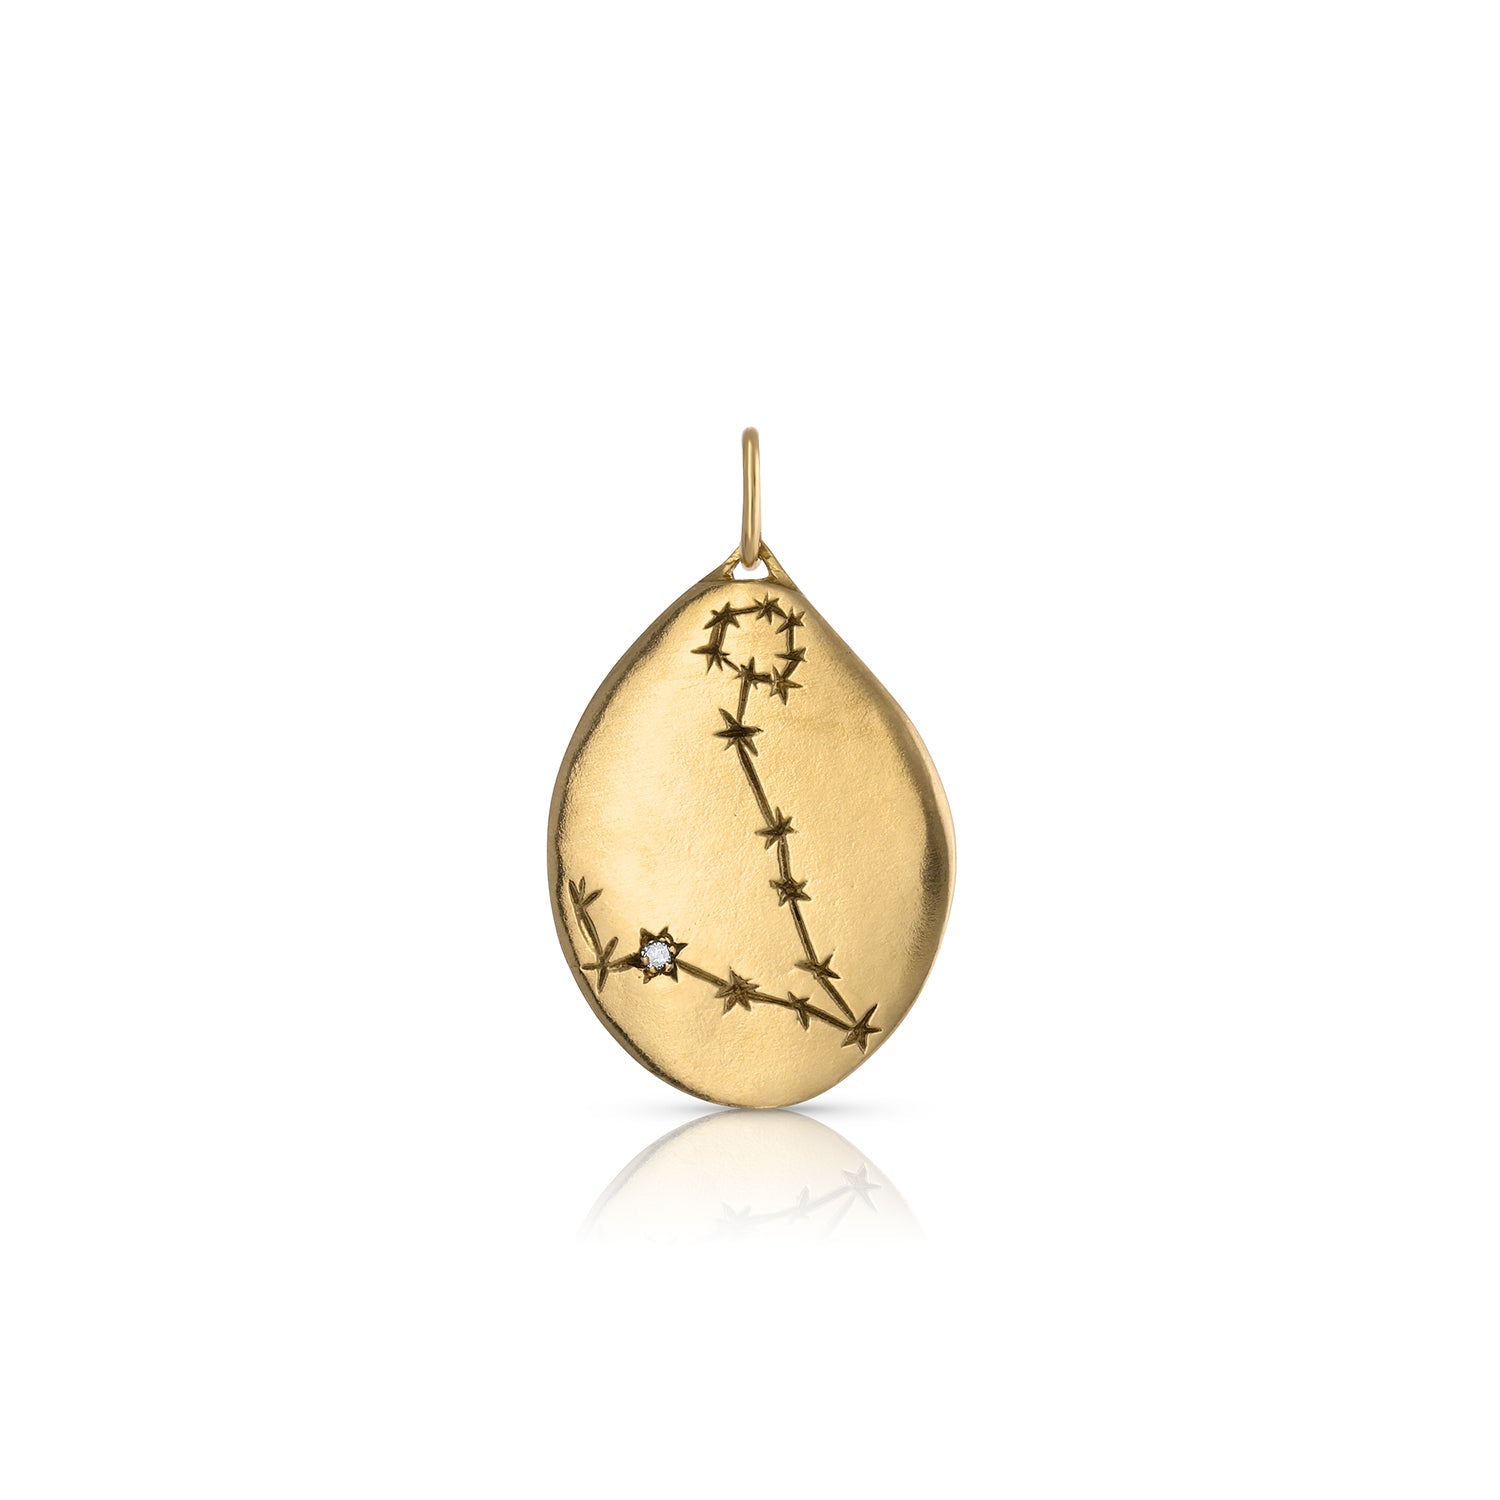 Pisces Celestial Zodiac Necklace | 12th HOUSE | Mystical Fine Jewelry | Gold constellation necklace | Fine zodiac necklace 14k gold constellation necklace Constellation necklace Pisces constellation necklace Gold Pisces constellation necklace |